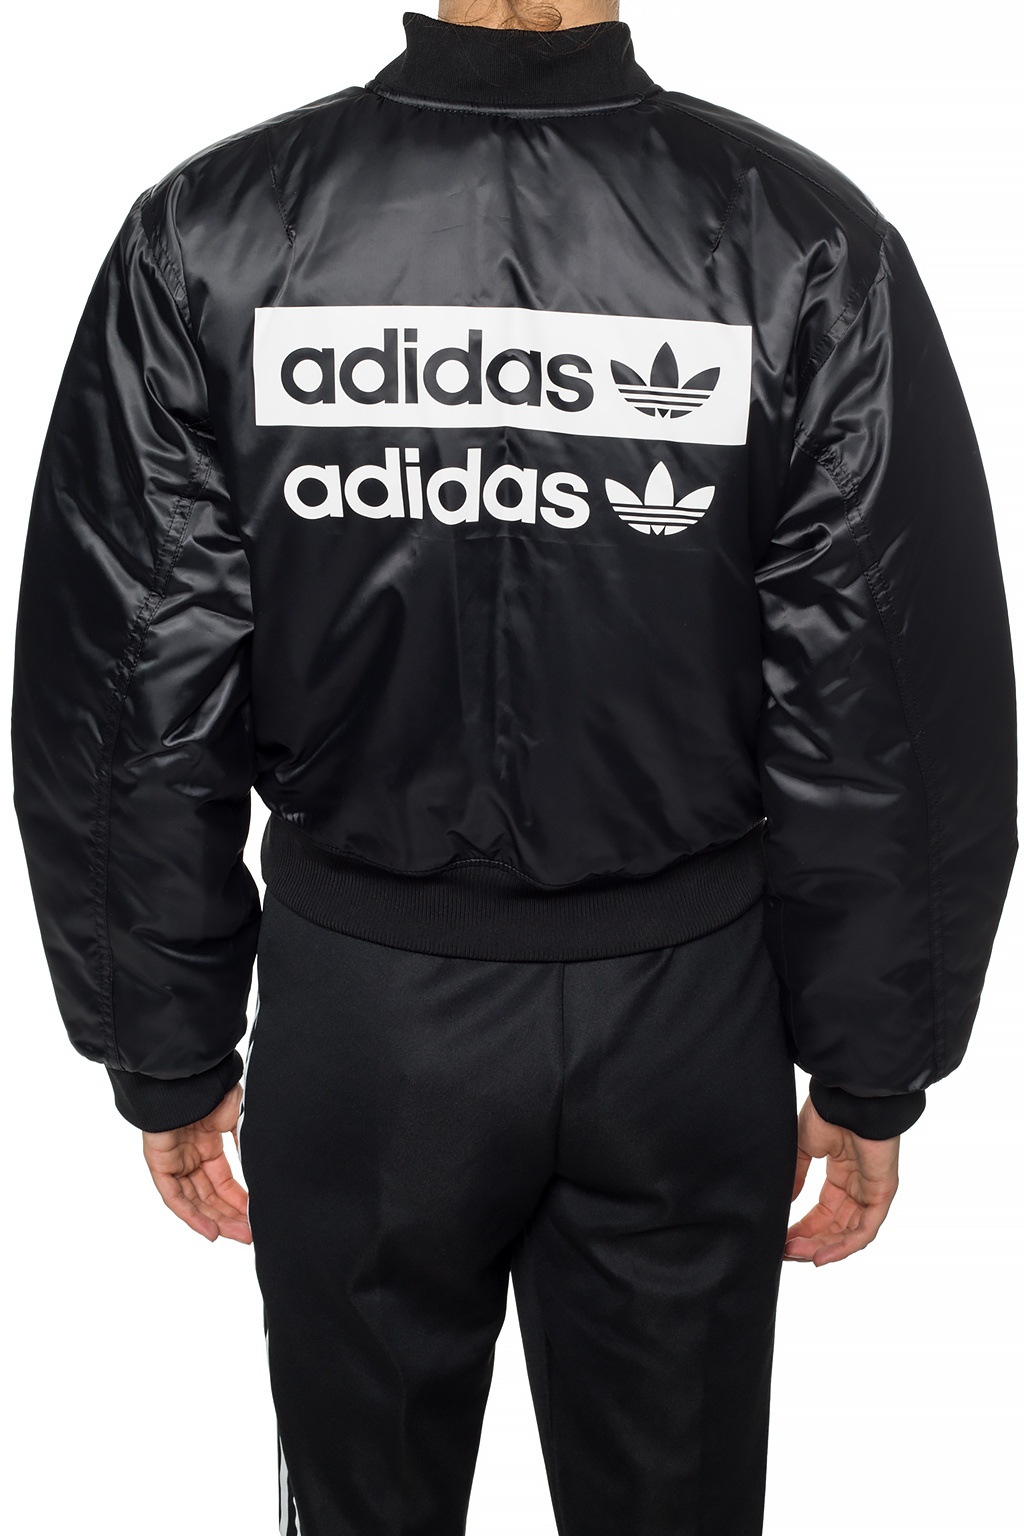 Antipoison Sovereign Clip butterfly Adidas Originals Bomber Jacket Greece, SAVE 47% - aveclumiere.com